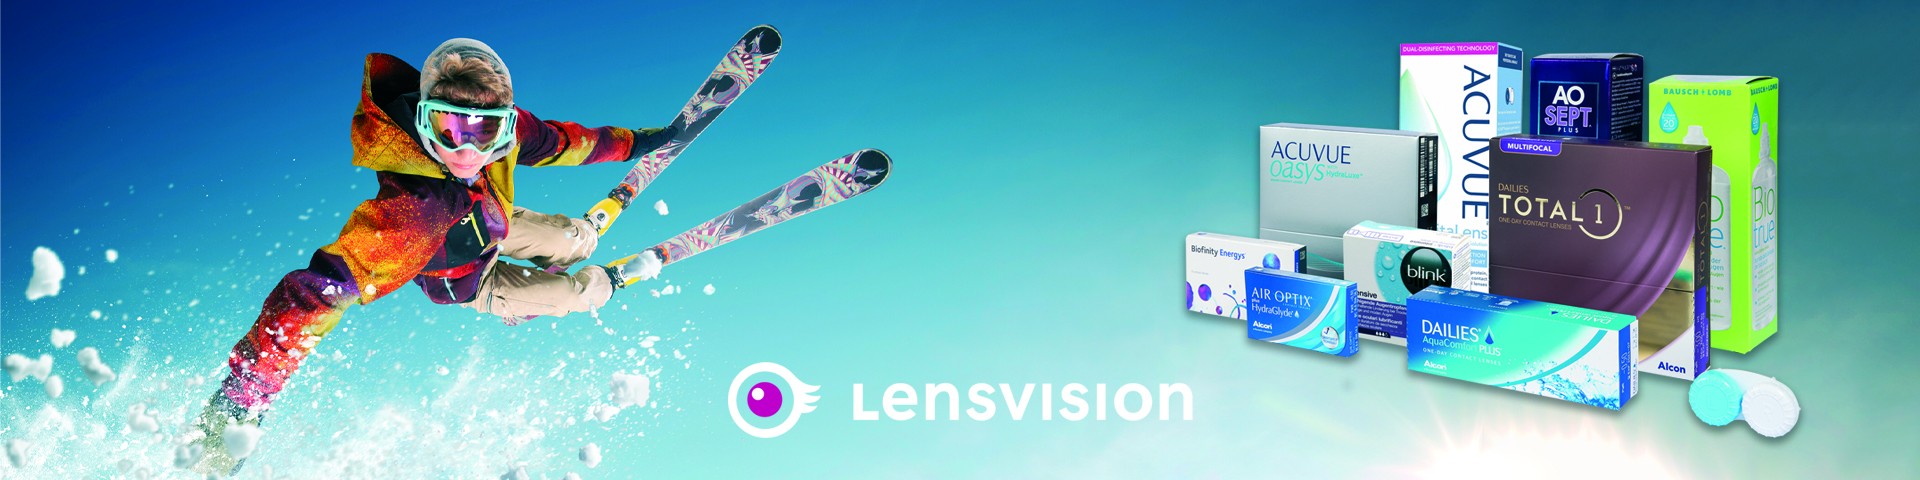 Lensvision 